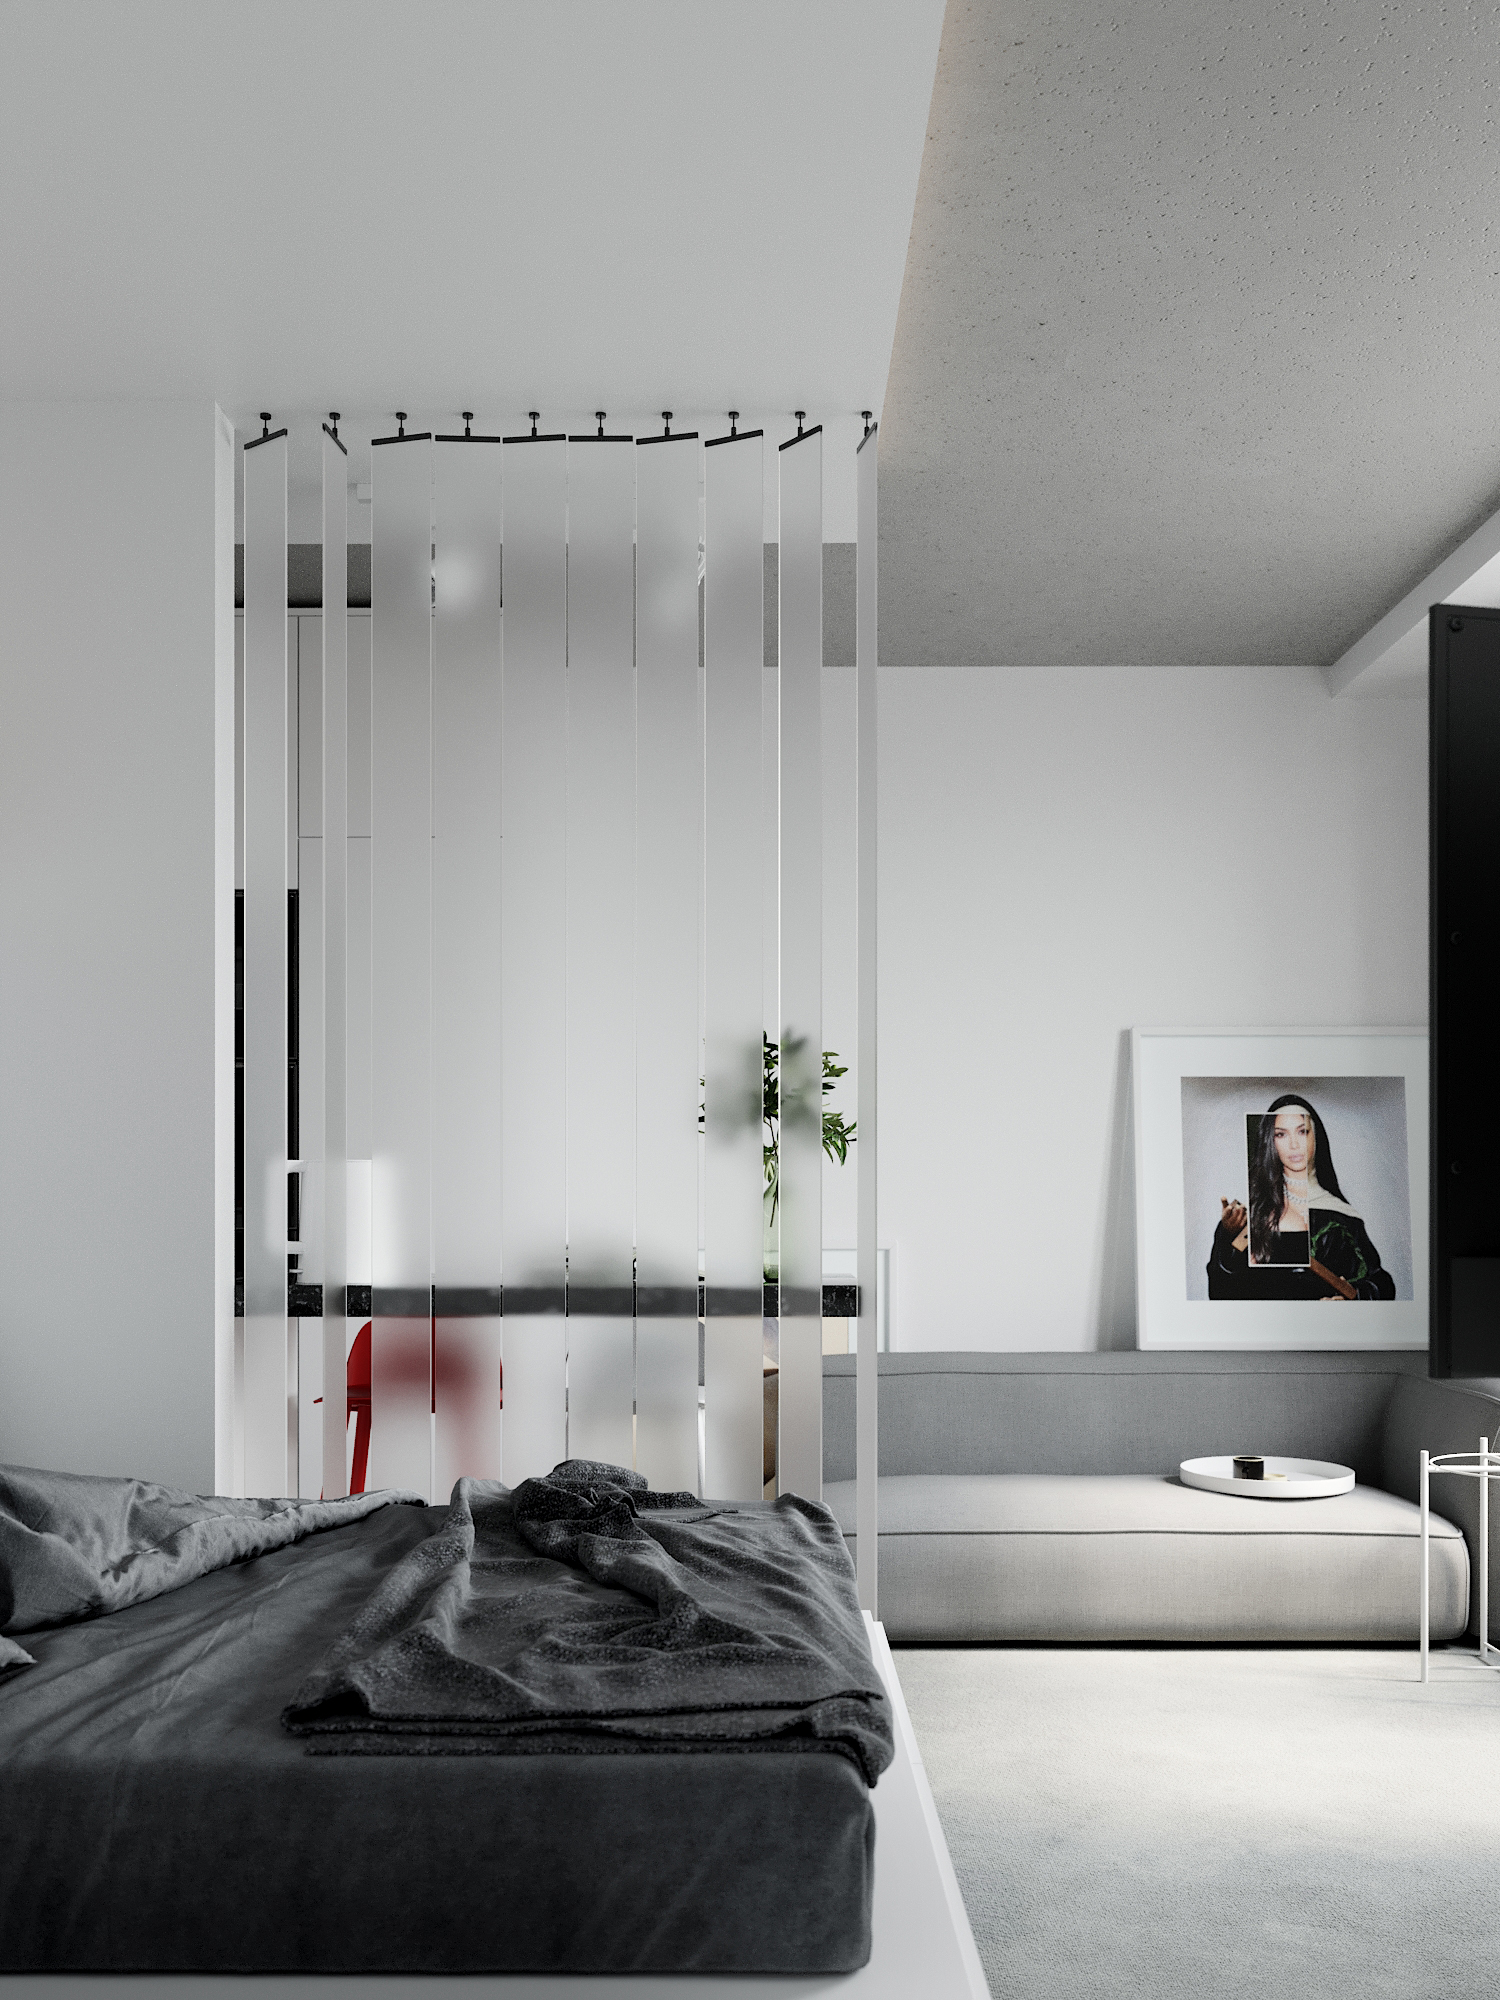 Apartment for an Architect Student